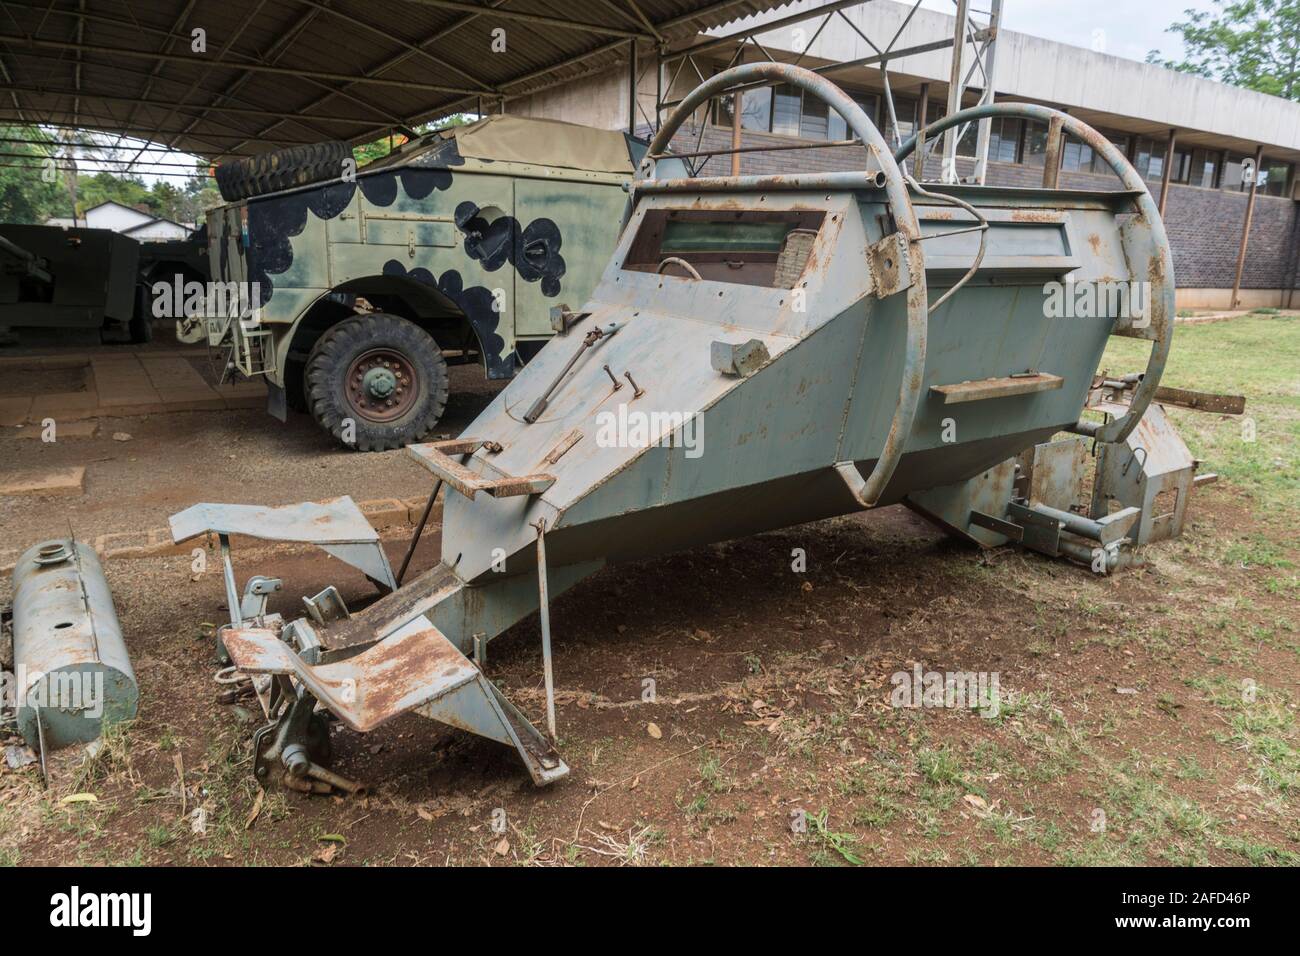 Gweru, Zimbabwe. The military museum. A Rhodesian Army artillery-towing truck (in the background) and the chasis of a 'Leopard' mine protected vehicle. Stock Photo